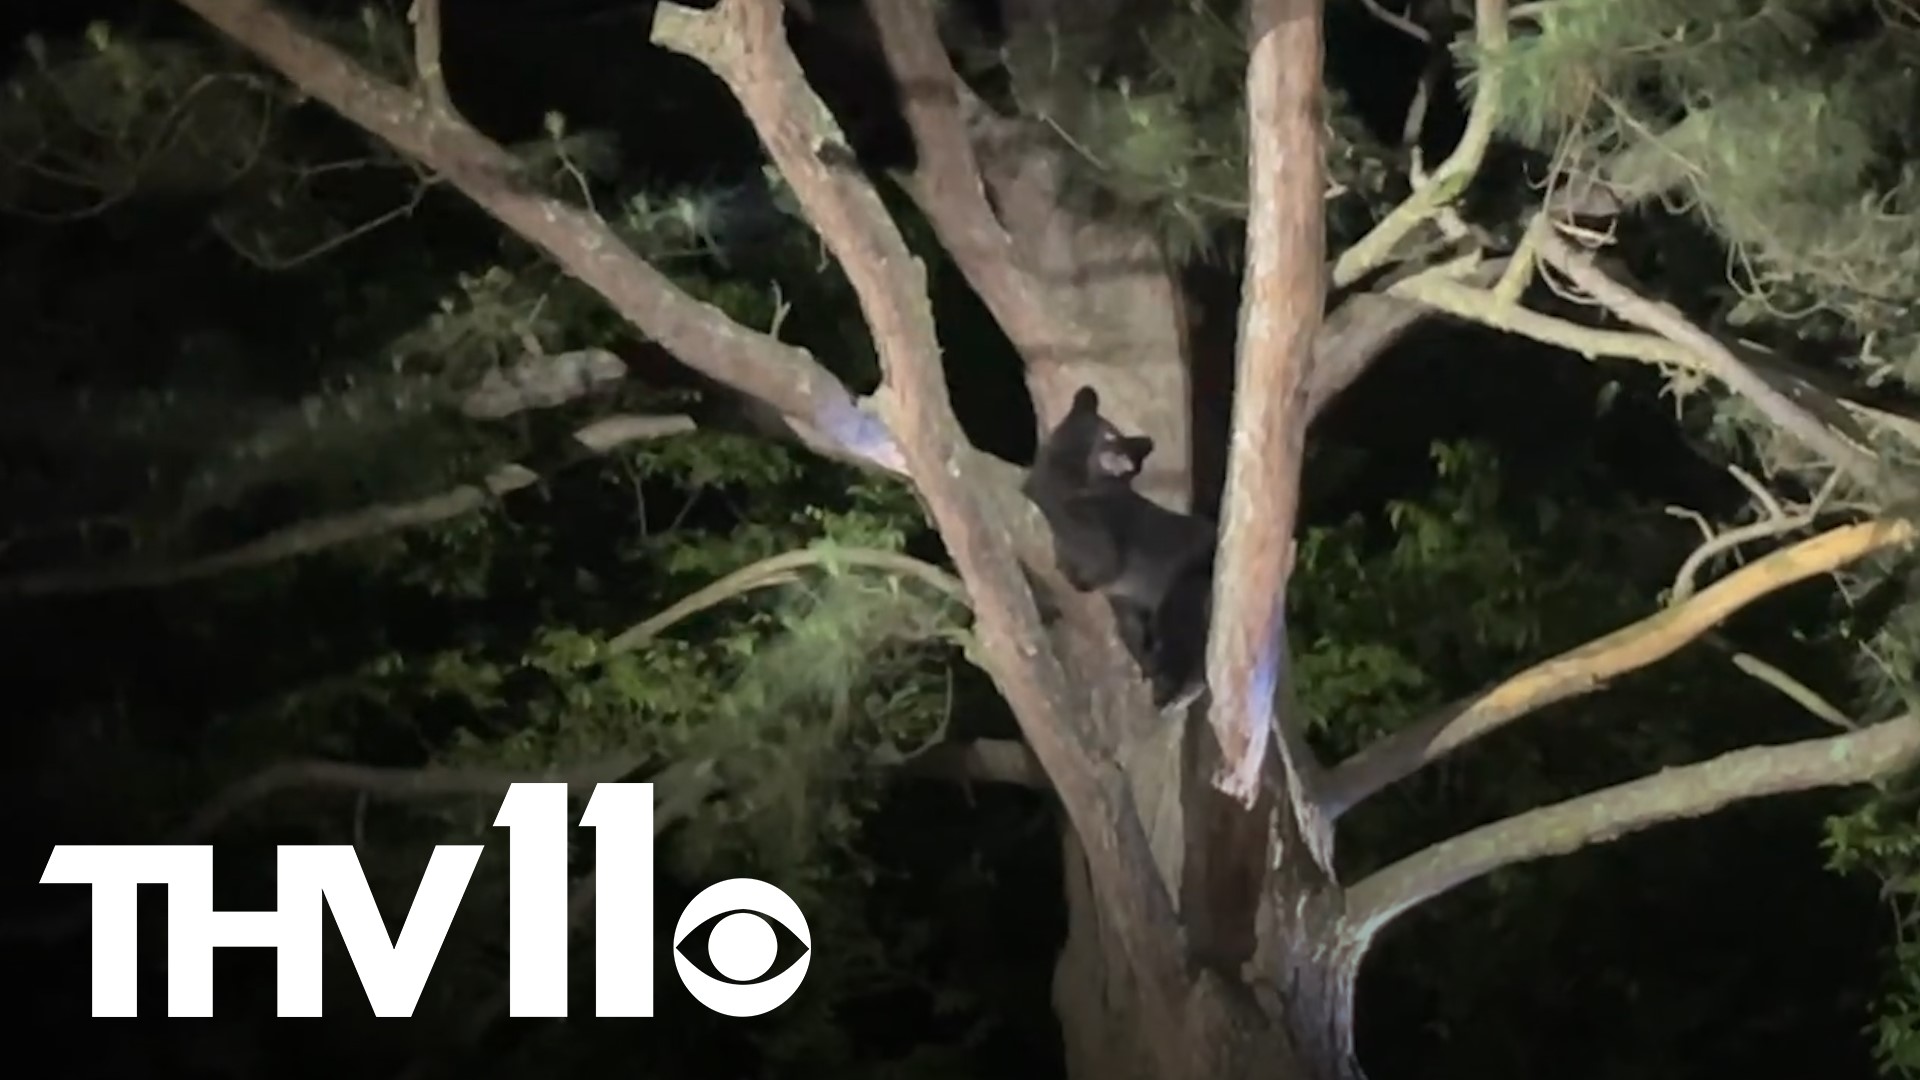 Noah Stephens captured a video of a bear falling out of a tree in Russellville Thursday night.